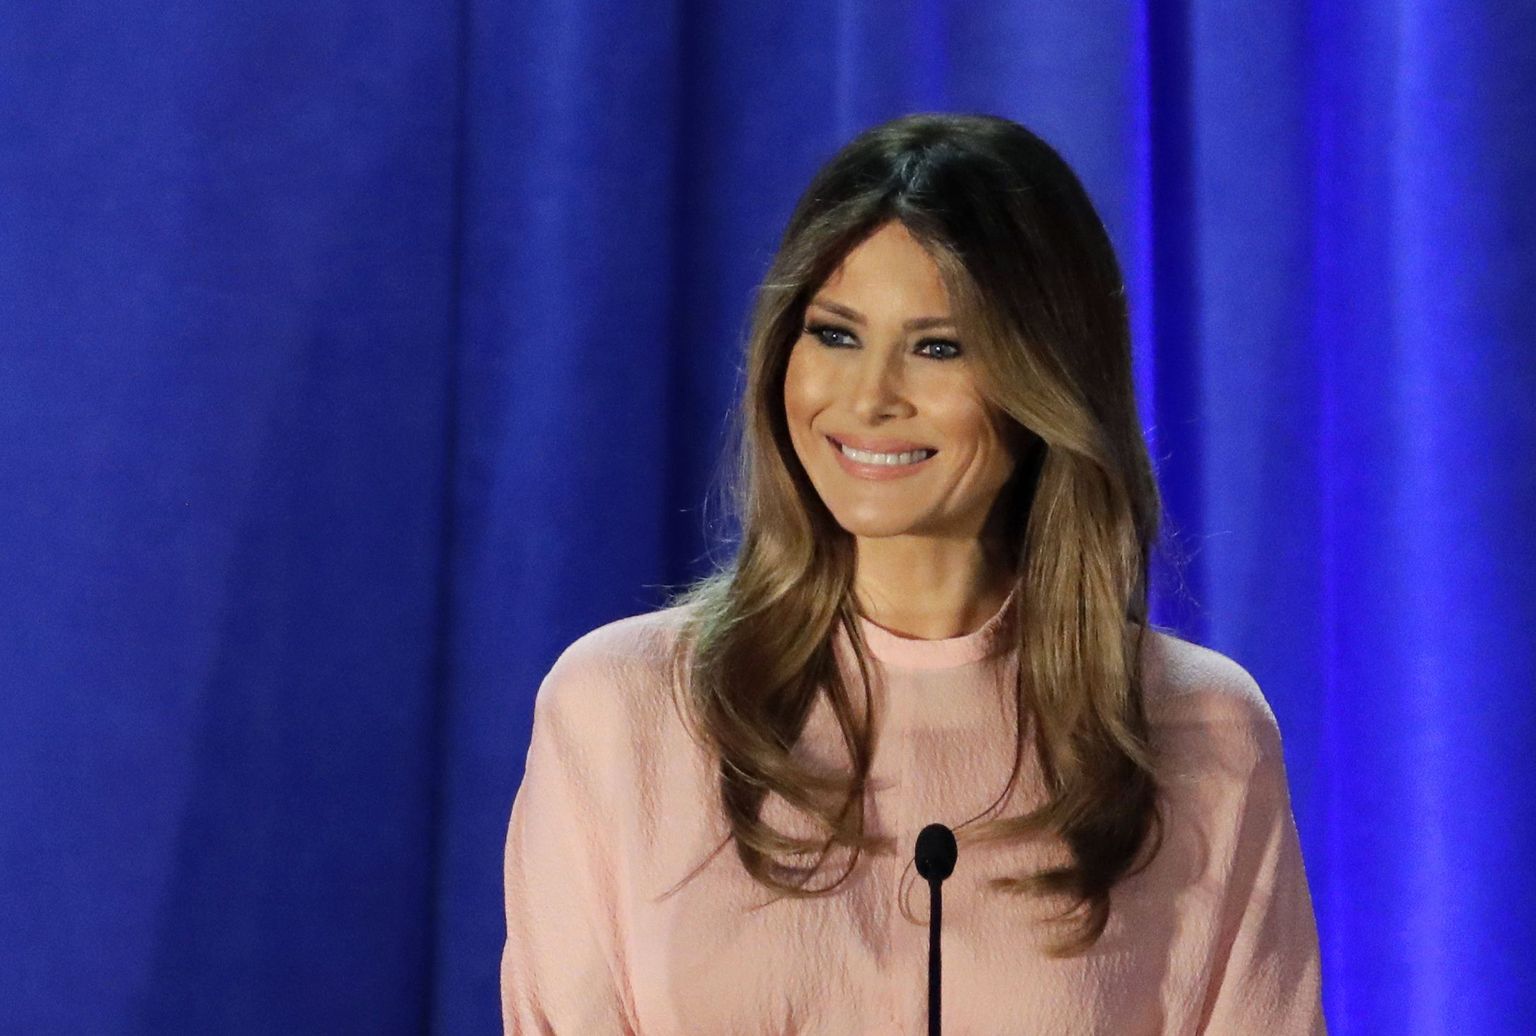 FILE - In this Nov. 3, 2016 file photo, Melania Trump, wife of Republican presidential candidate Donald Trump, speaks in Berwyn, Pa. Documents obtained by The Associated Press from 20 years ago show that Melania Trump was paid for 10 modeling jobs in the United States worth $20,056 before she had legal permission to work in the country. The documents provide the most detailed accounting yet of Mrs. Trump's first months in the U.S.(AP Photo/Patrick Semansky, File)